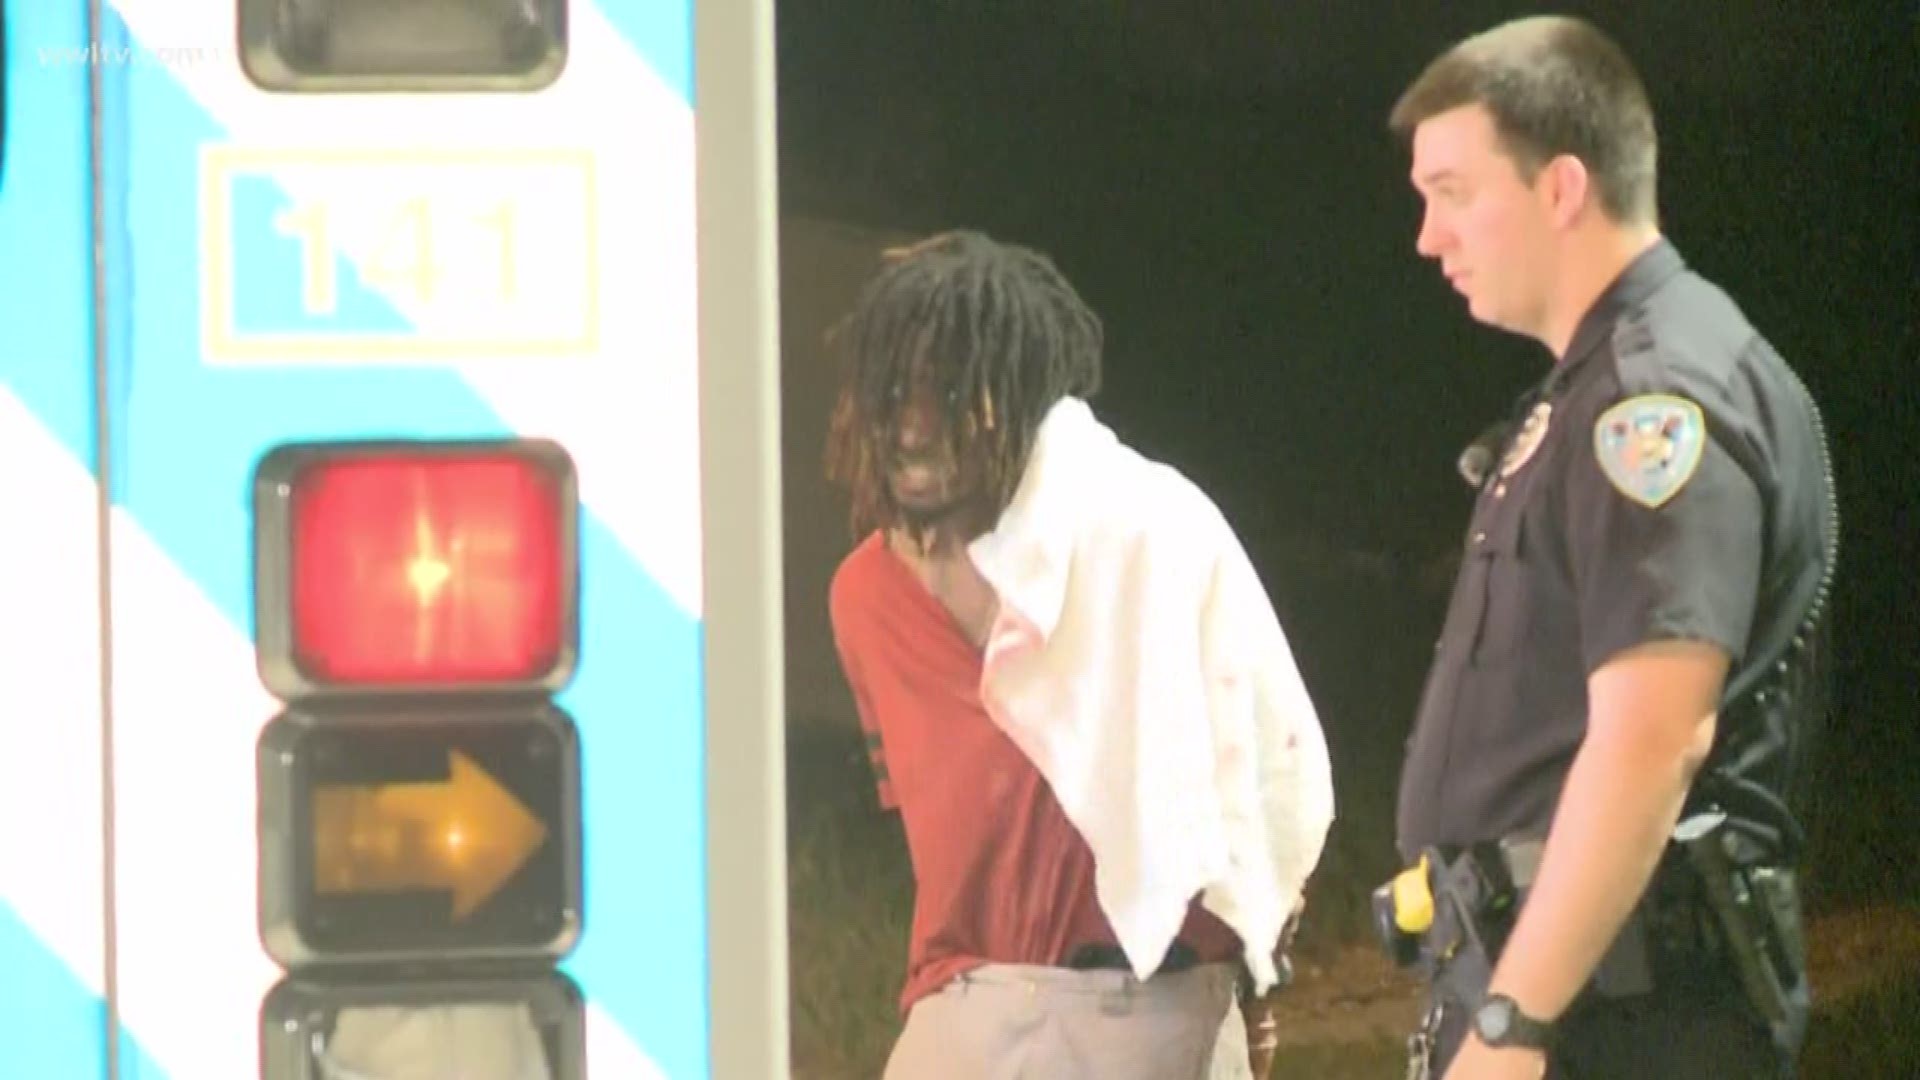 5 teens have been arrested after a rolling shootout and chase through Jefferson Parish streets early Wednesday.